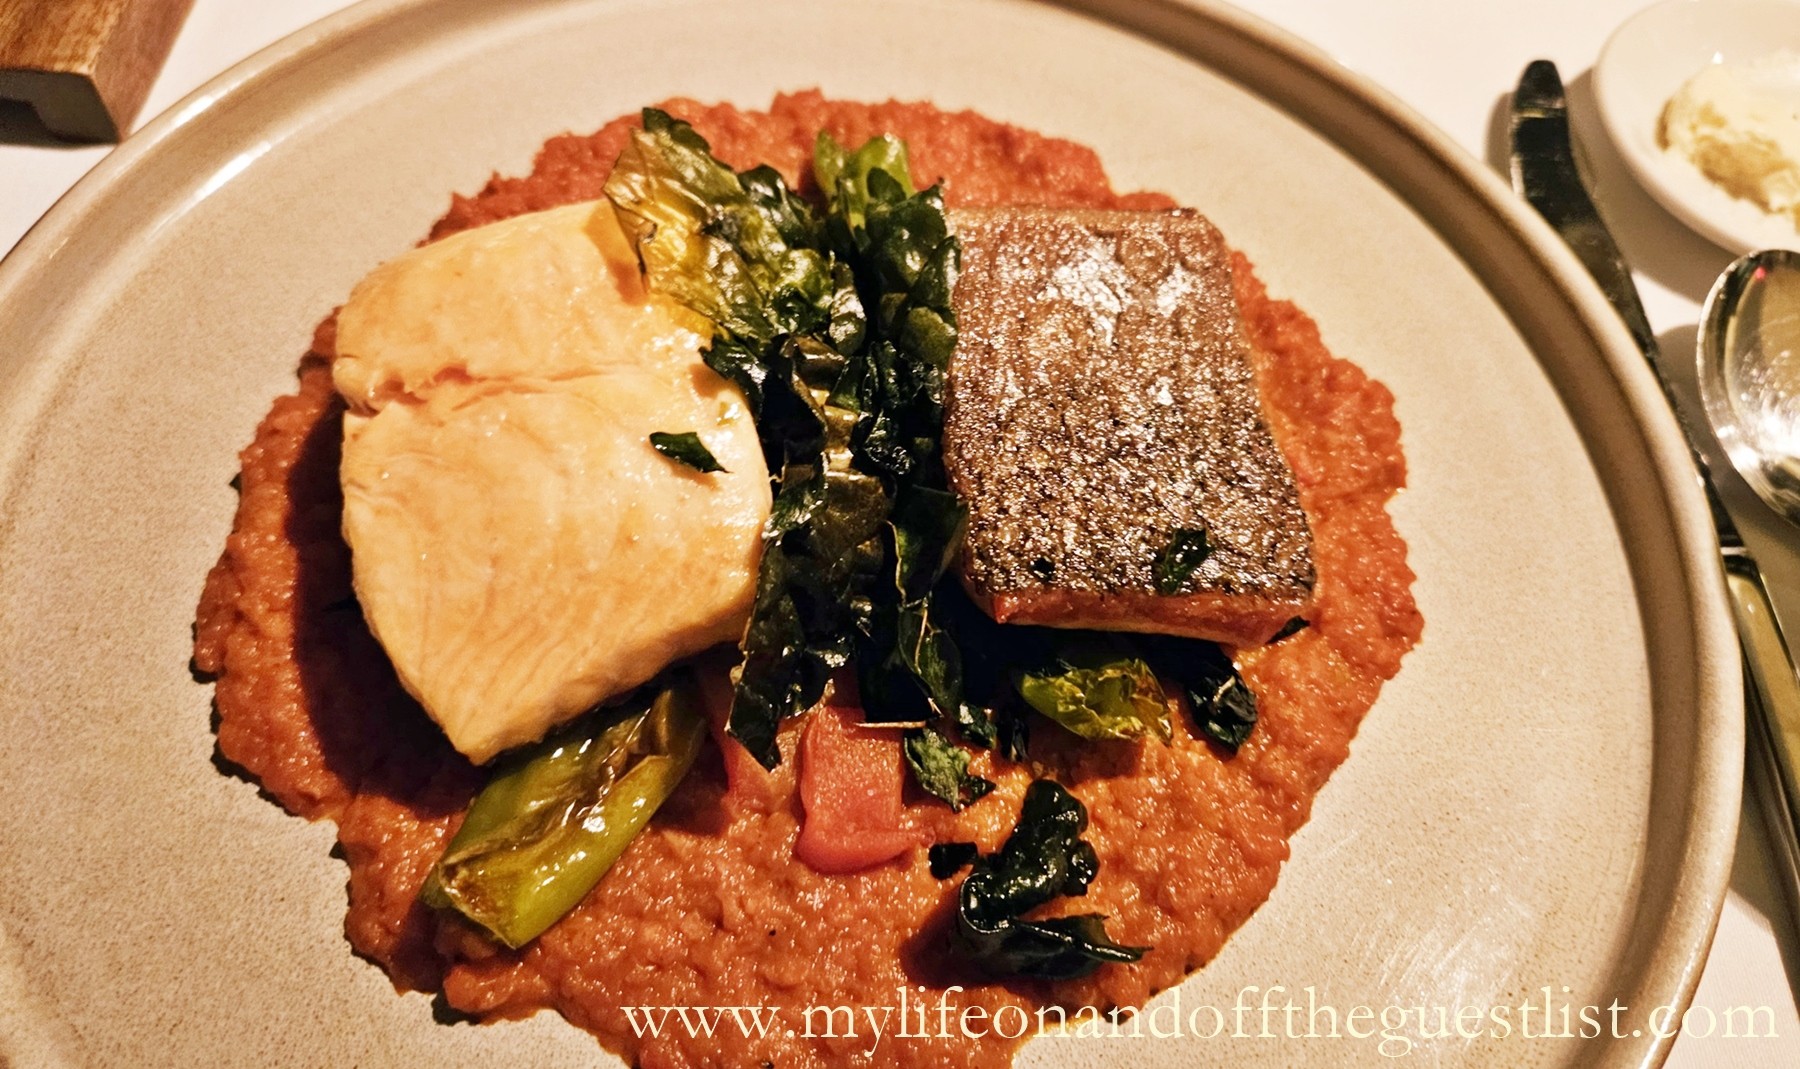 Restaurant Review: Pre-Theater Dining at The Lambs Club